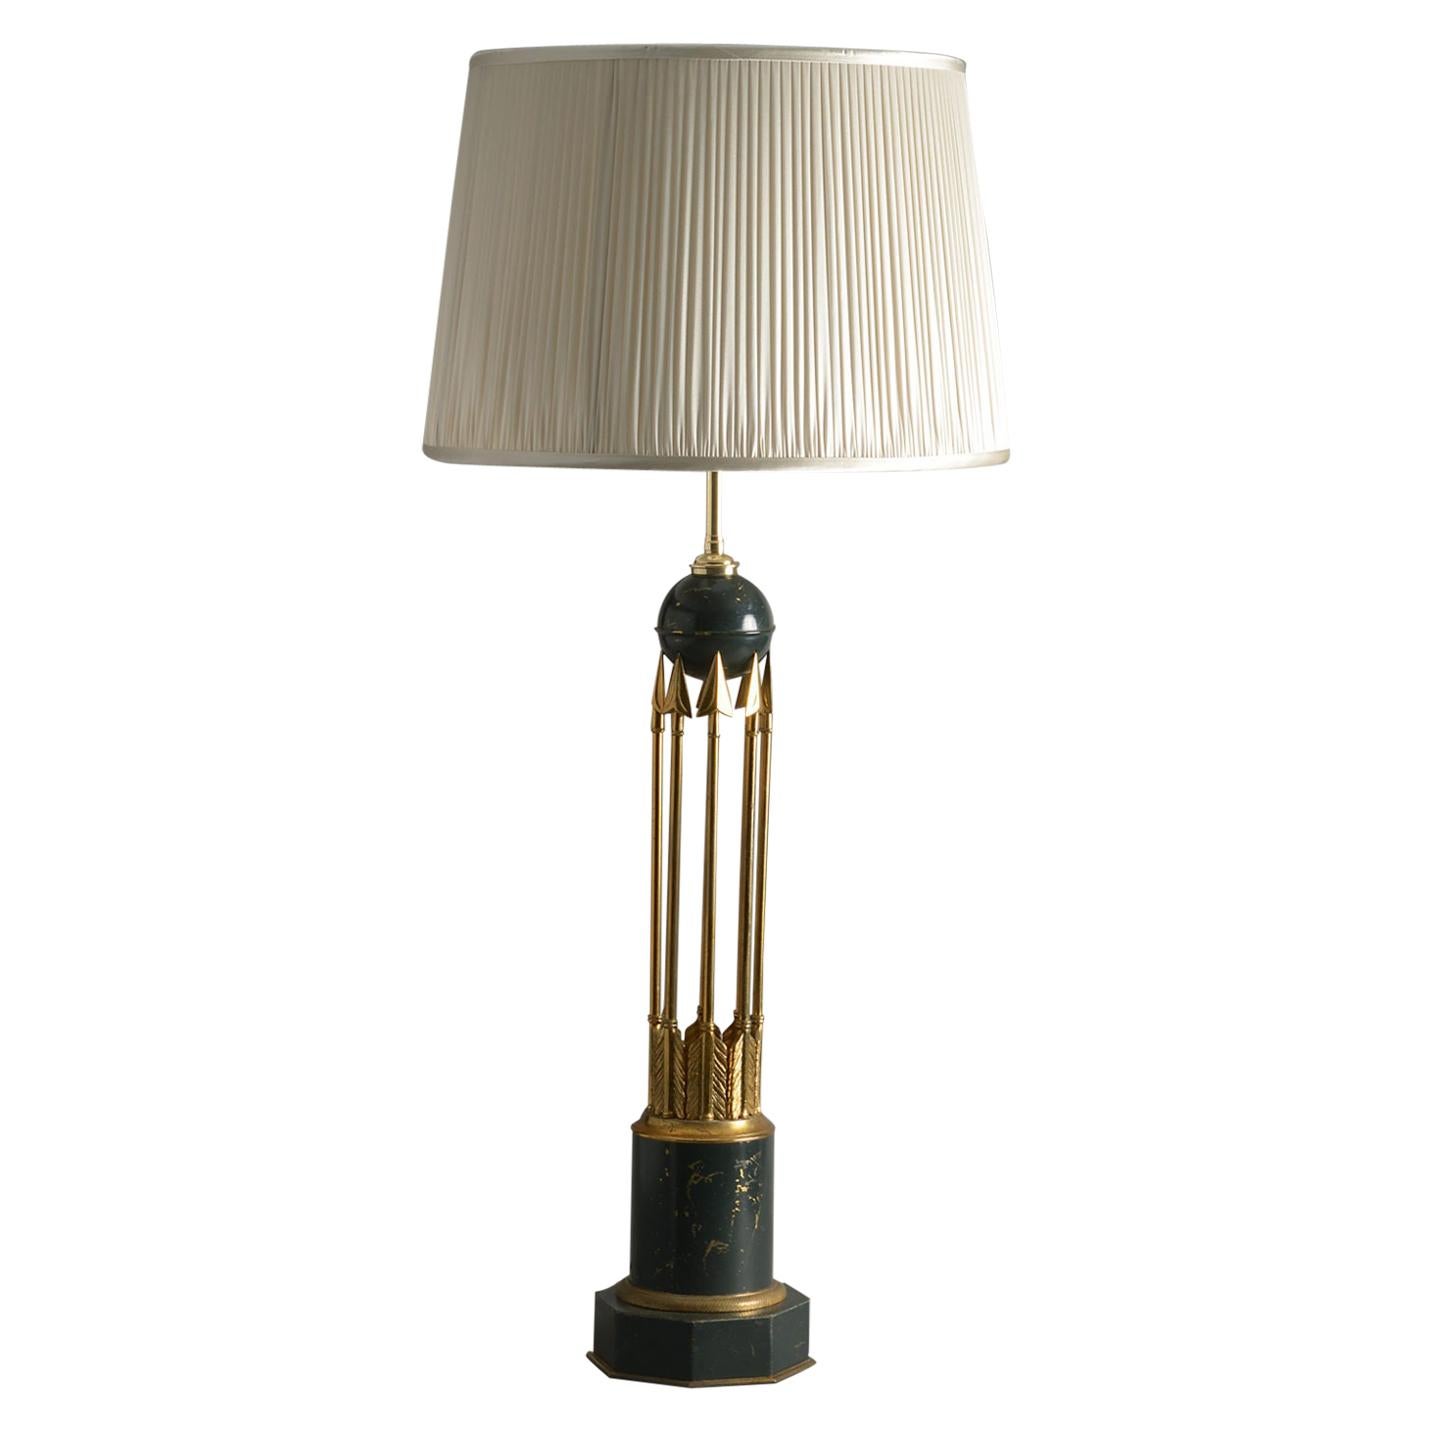 Midcentury Empire Style Arrow Lamp Base For Sale